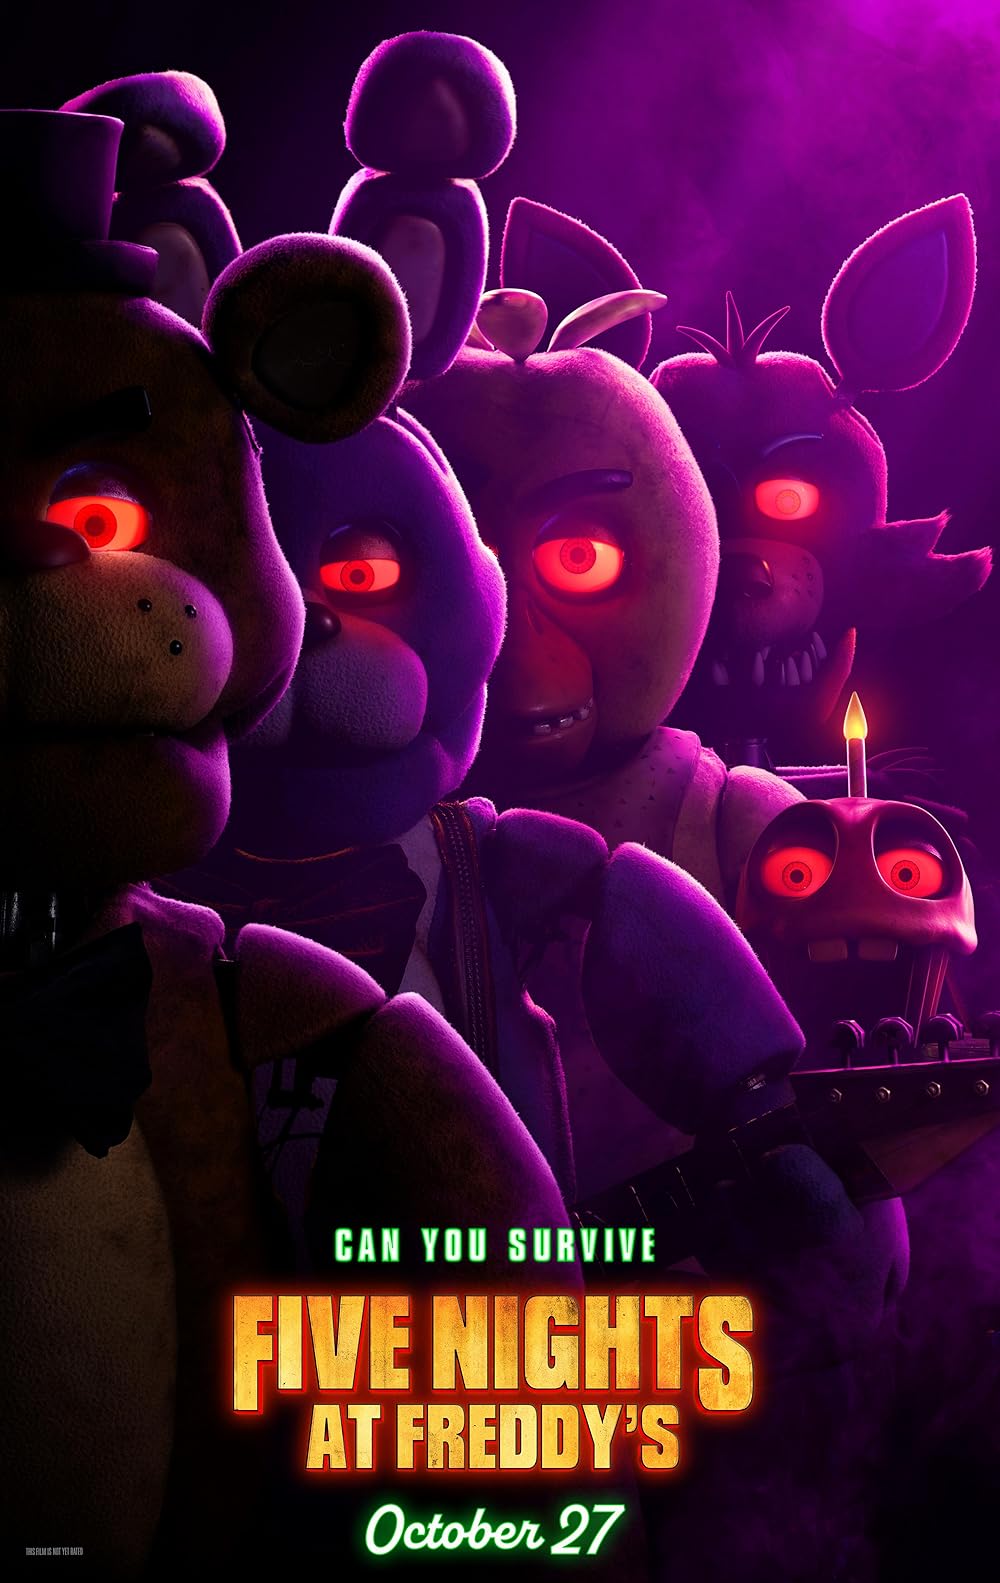 Film review: Balancing horror and heart, 'Five Nights at Freddy's'  adaptation changes the game - Daily Bruin